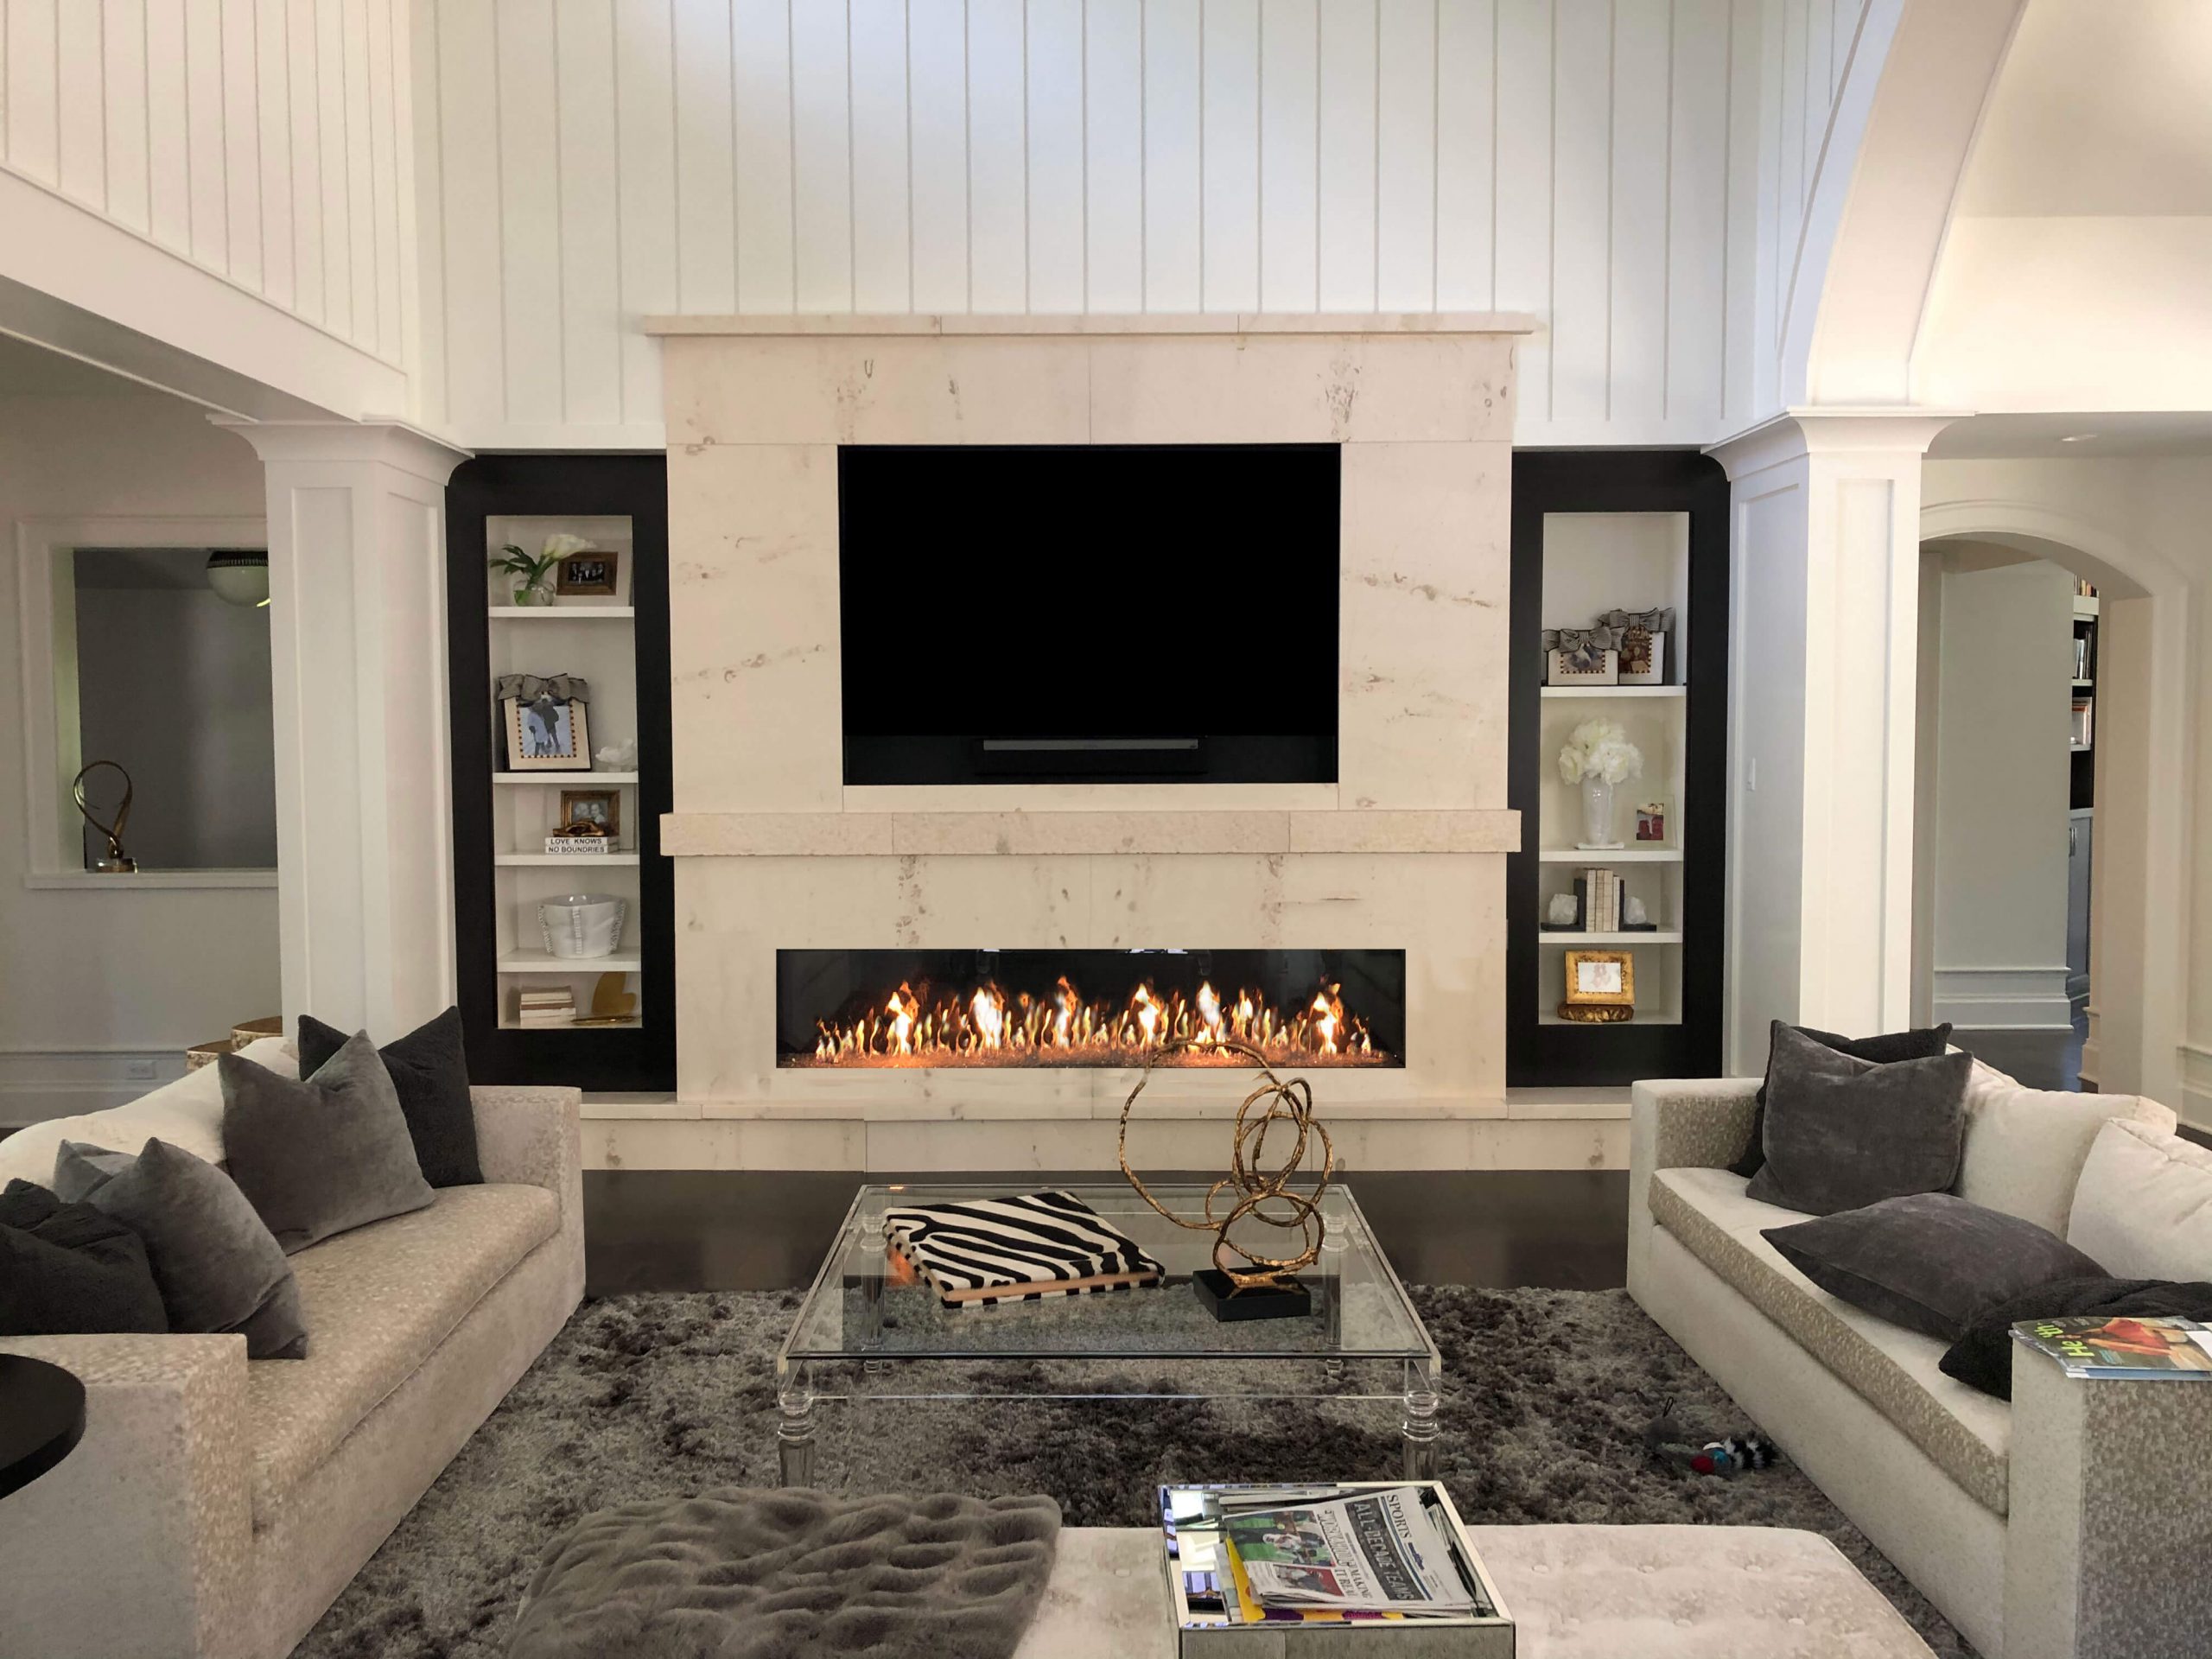 Fireplace Trends 2021: Eight Inspiring Fireplace Designs - Acucraft Signature 8 Single SiDeD Linear Gas Fireplace With Starfire Glass MeDia ScaleD